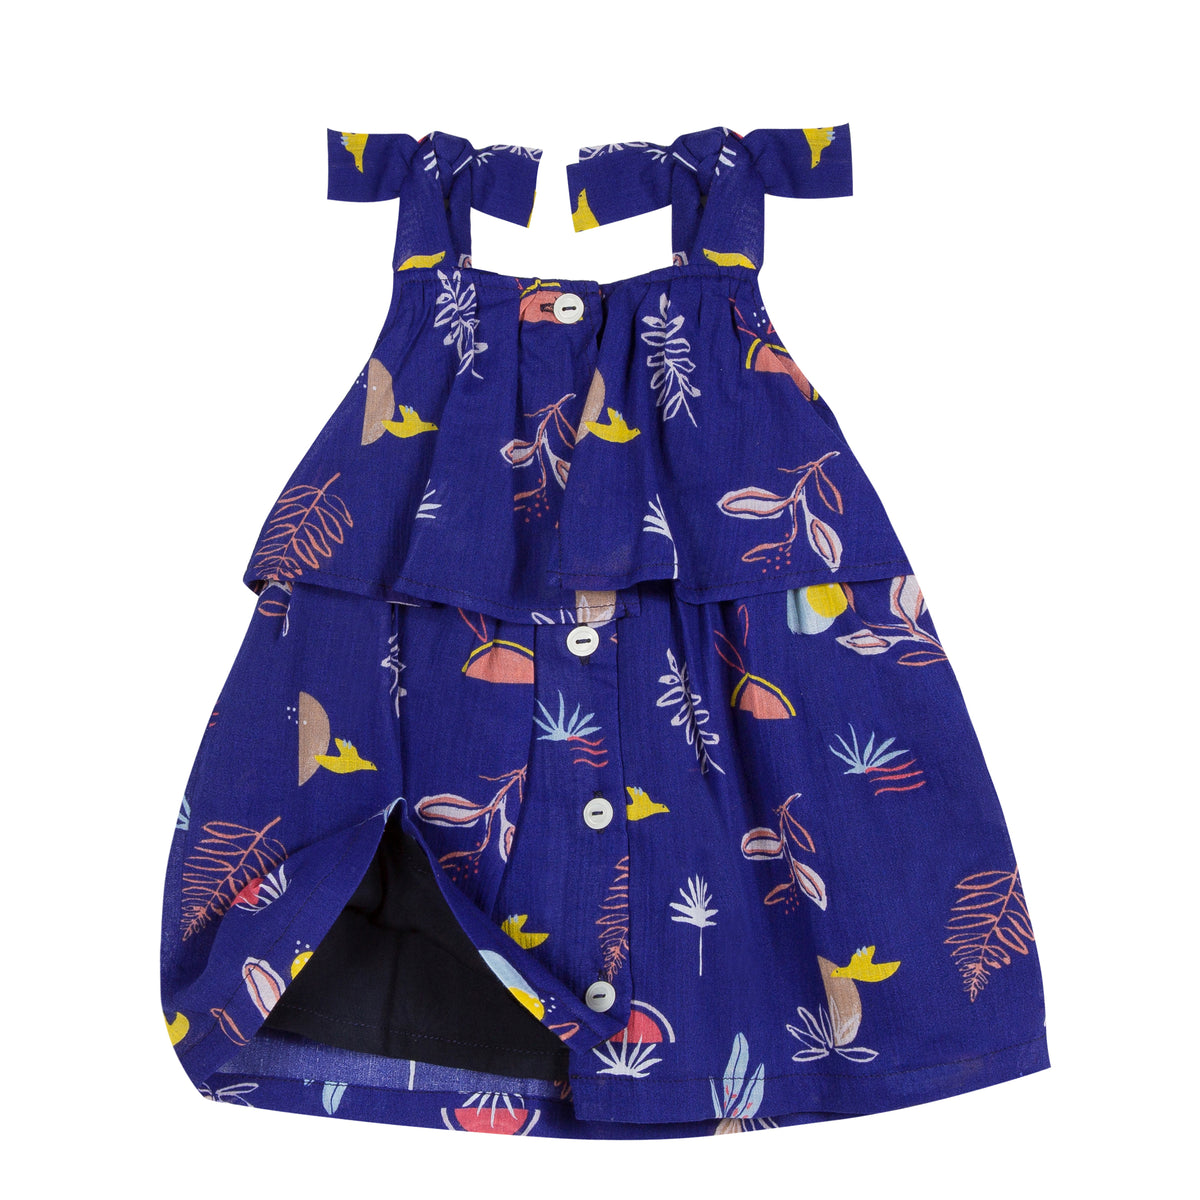 Ultramarine cotton-crepe dress is printed with a cheerful, exotic pattern of birds and tropical plants all over. Designed by Jean Bourget.